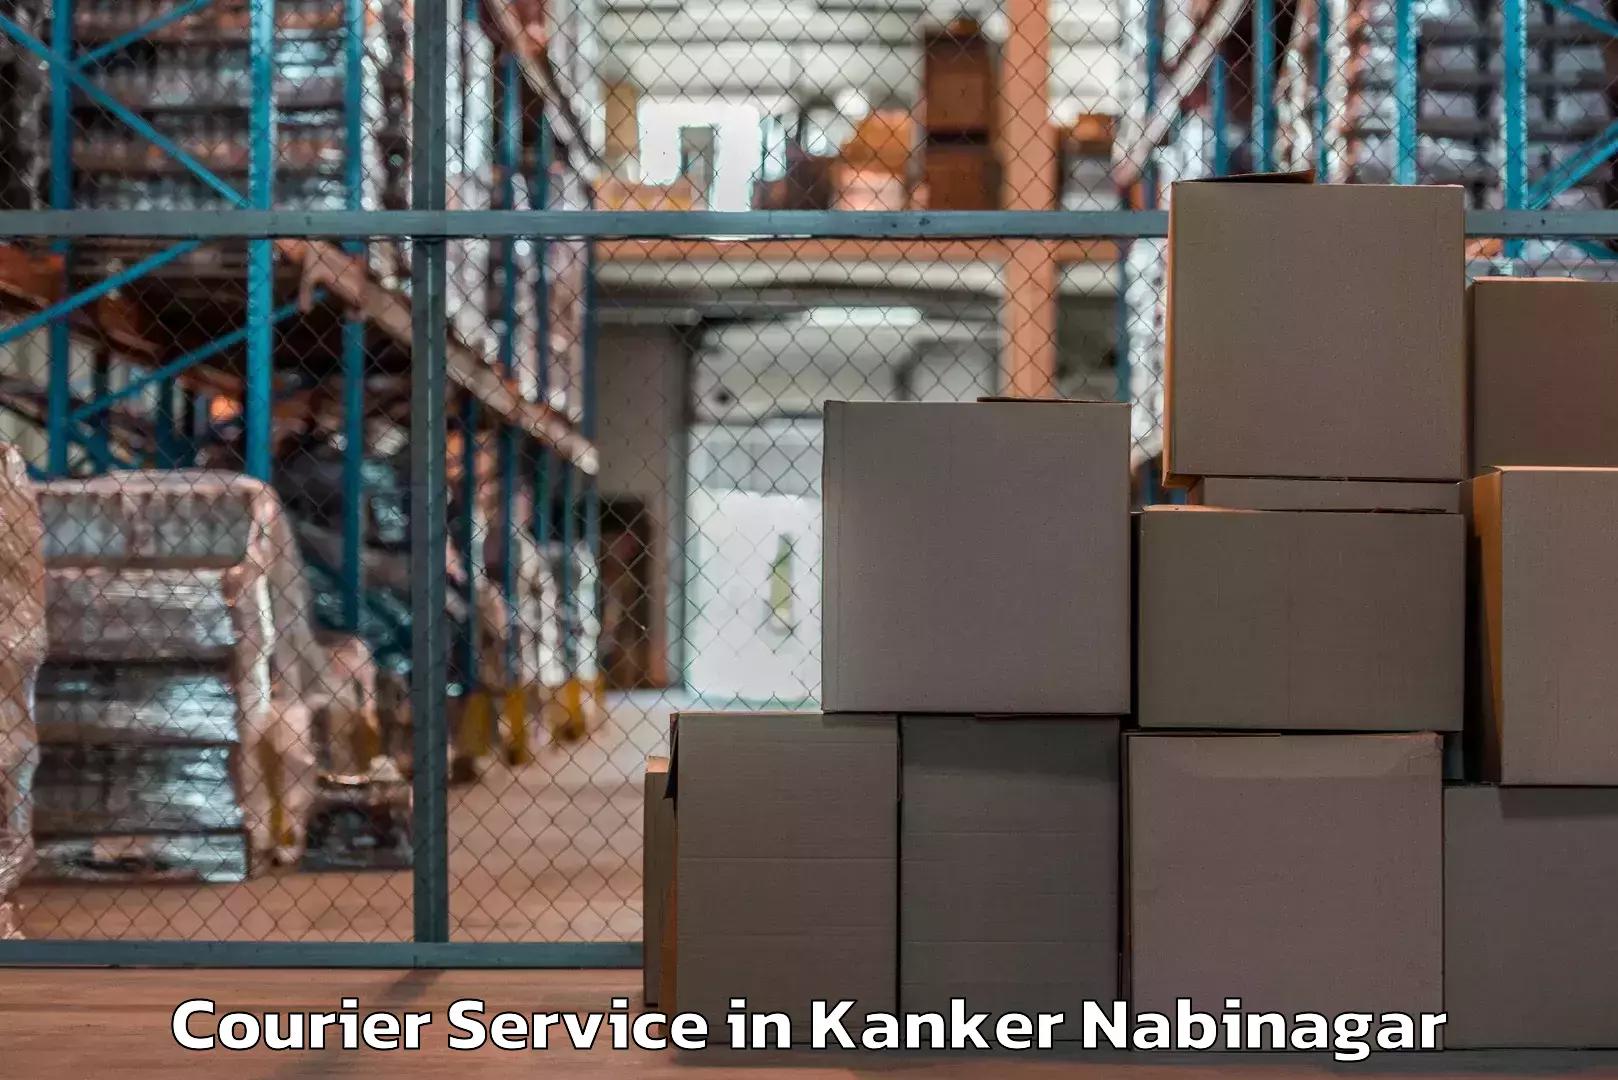 Automated parcel services in Kanker Nabinagar